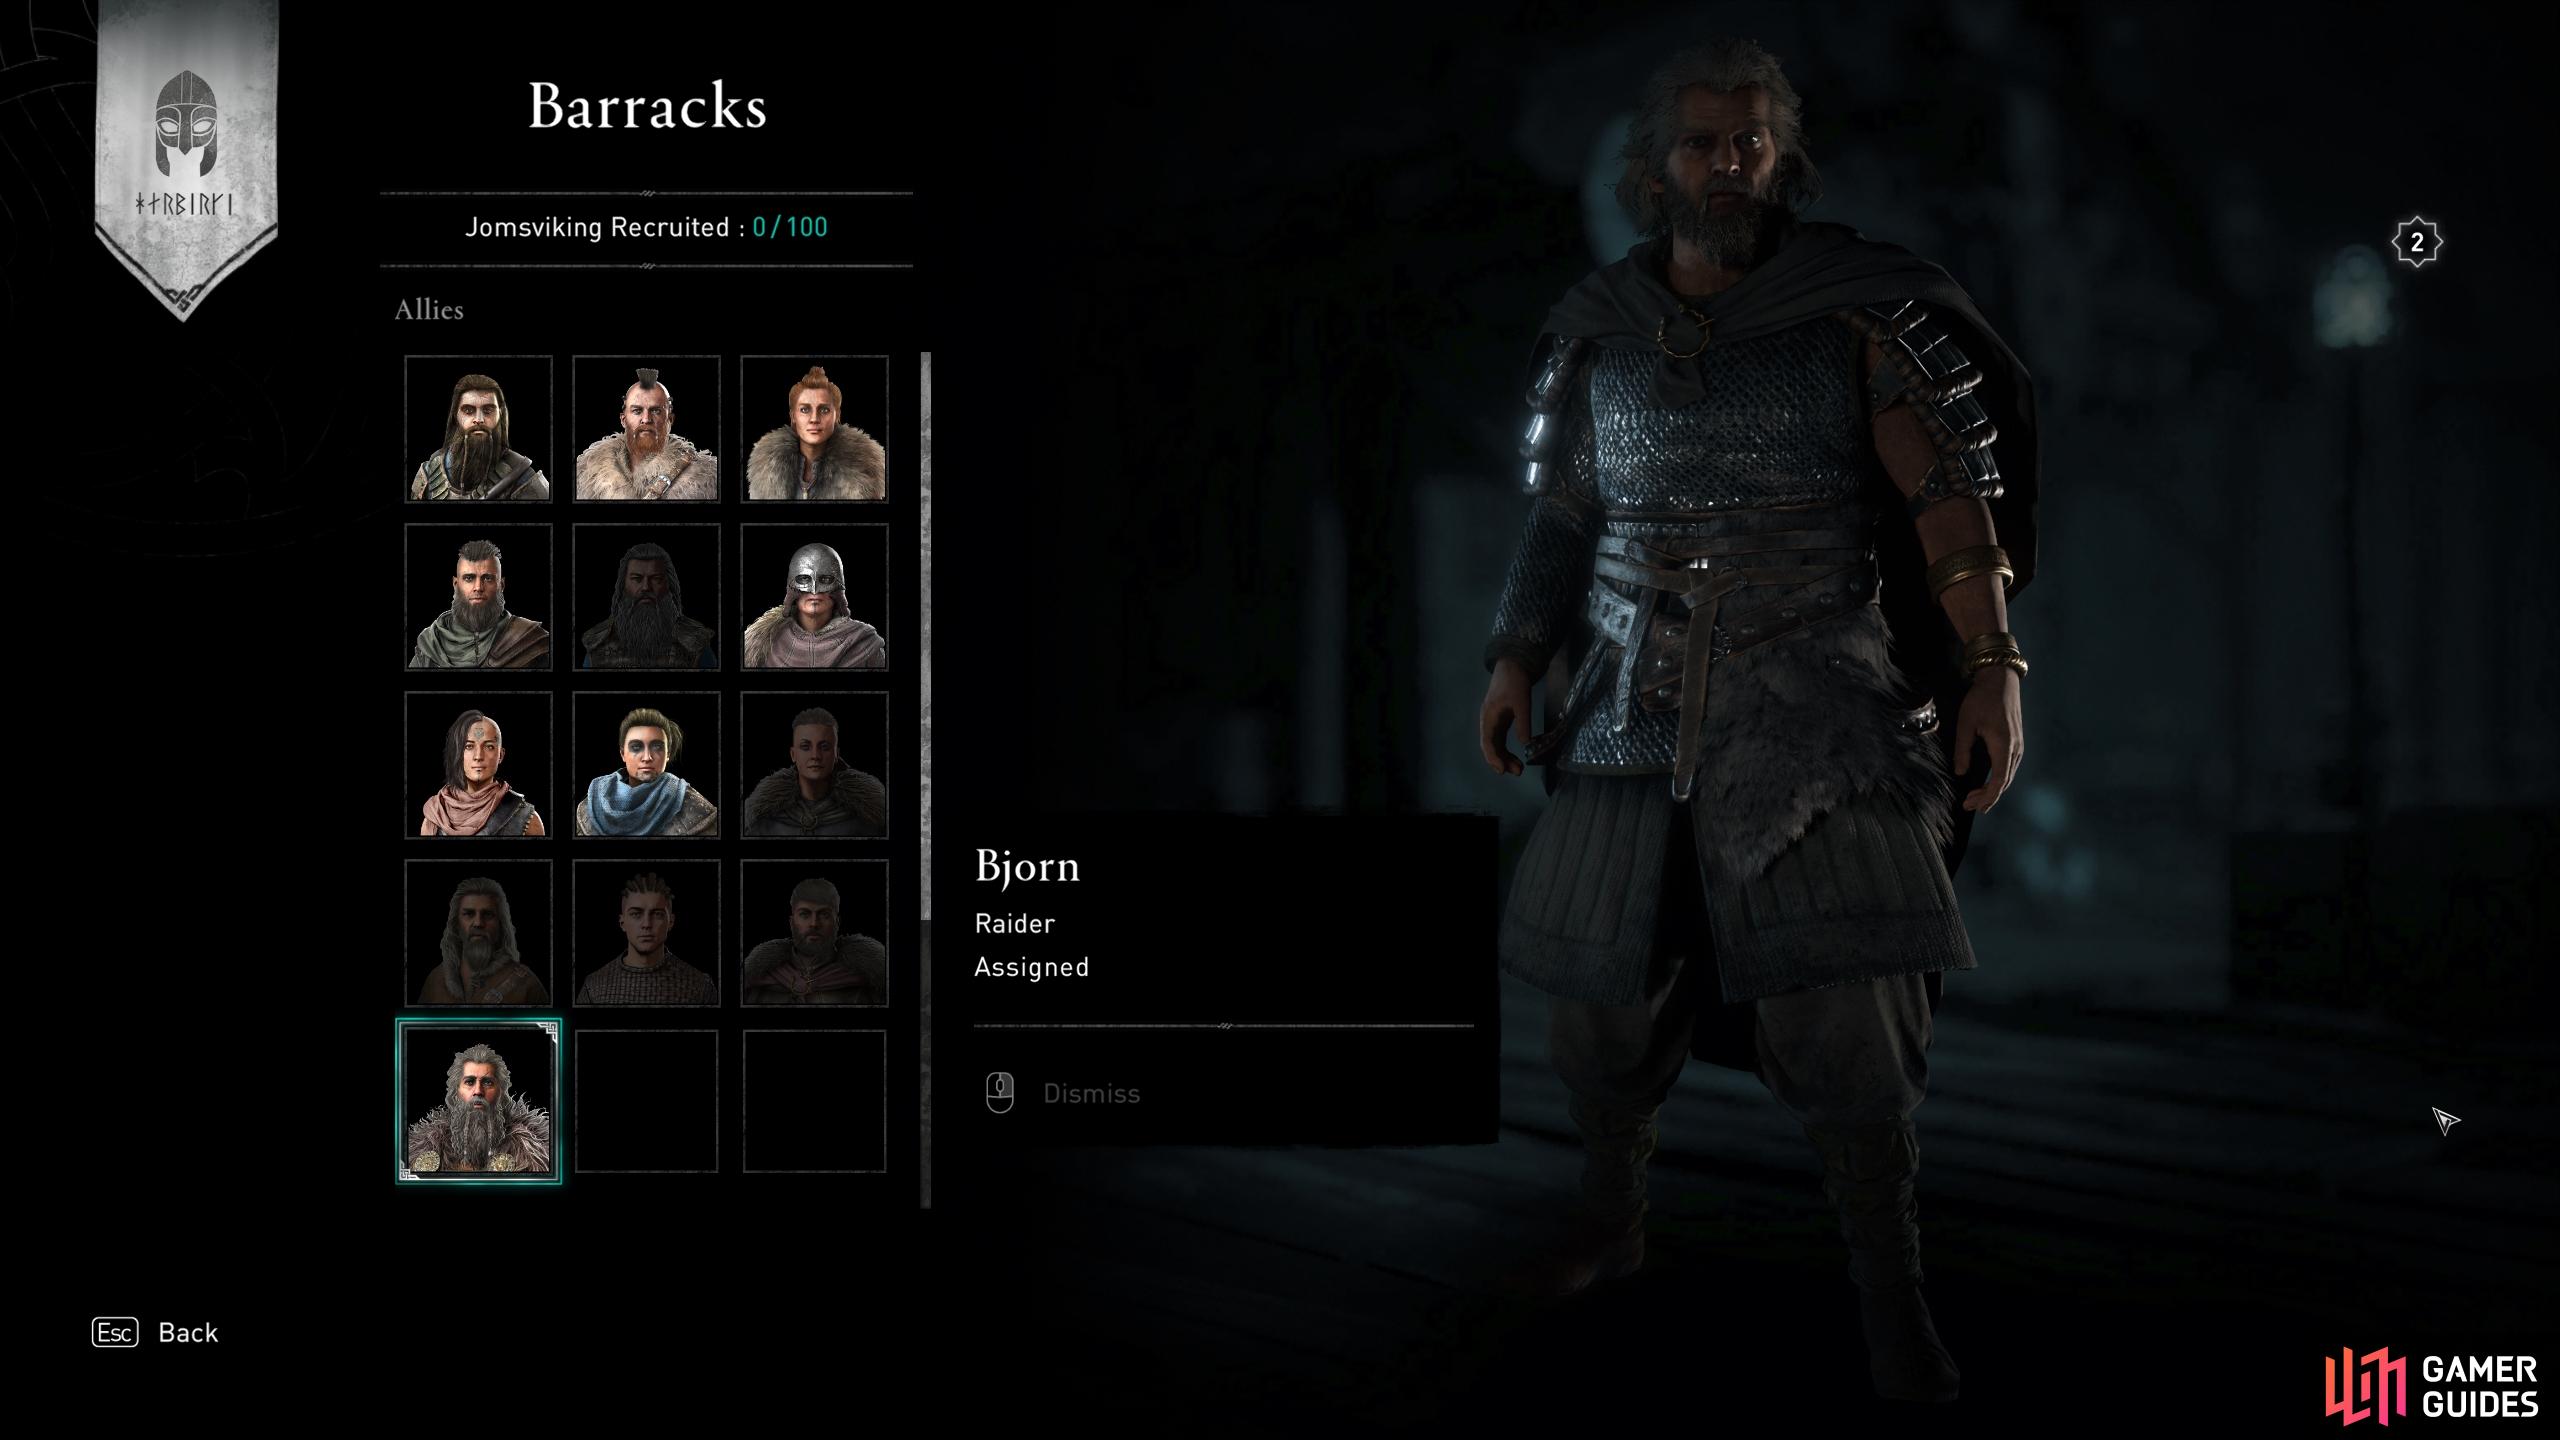 You'll be able to recruit Bjorn as a member of your crew once the quest is complete.